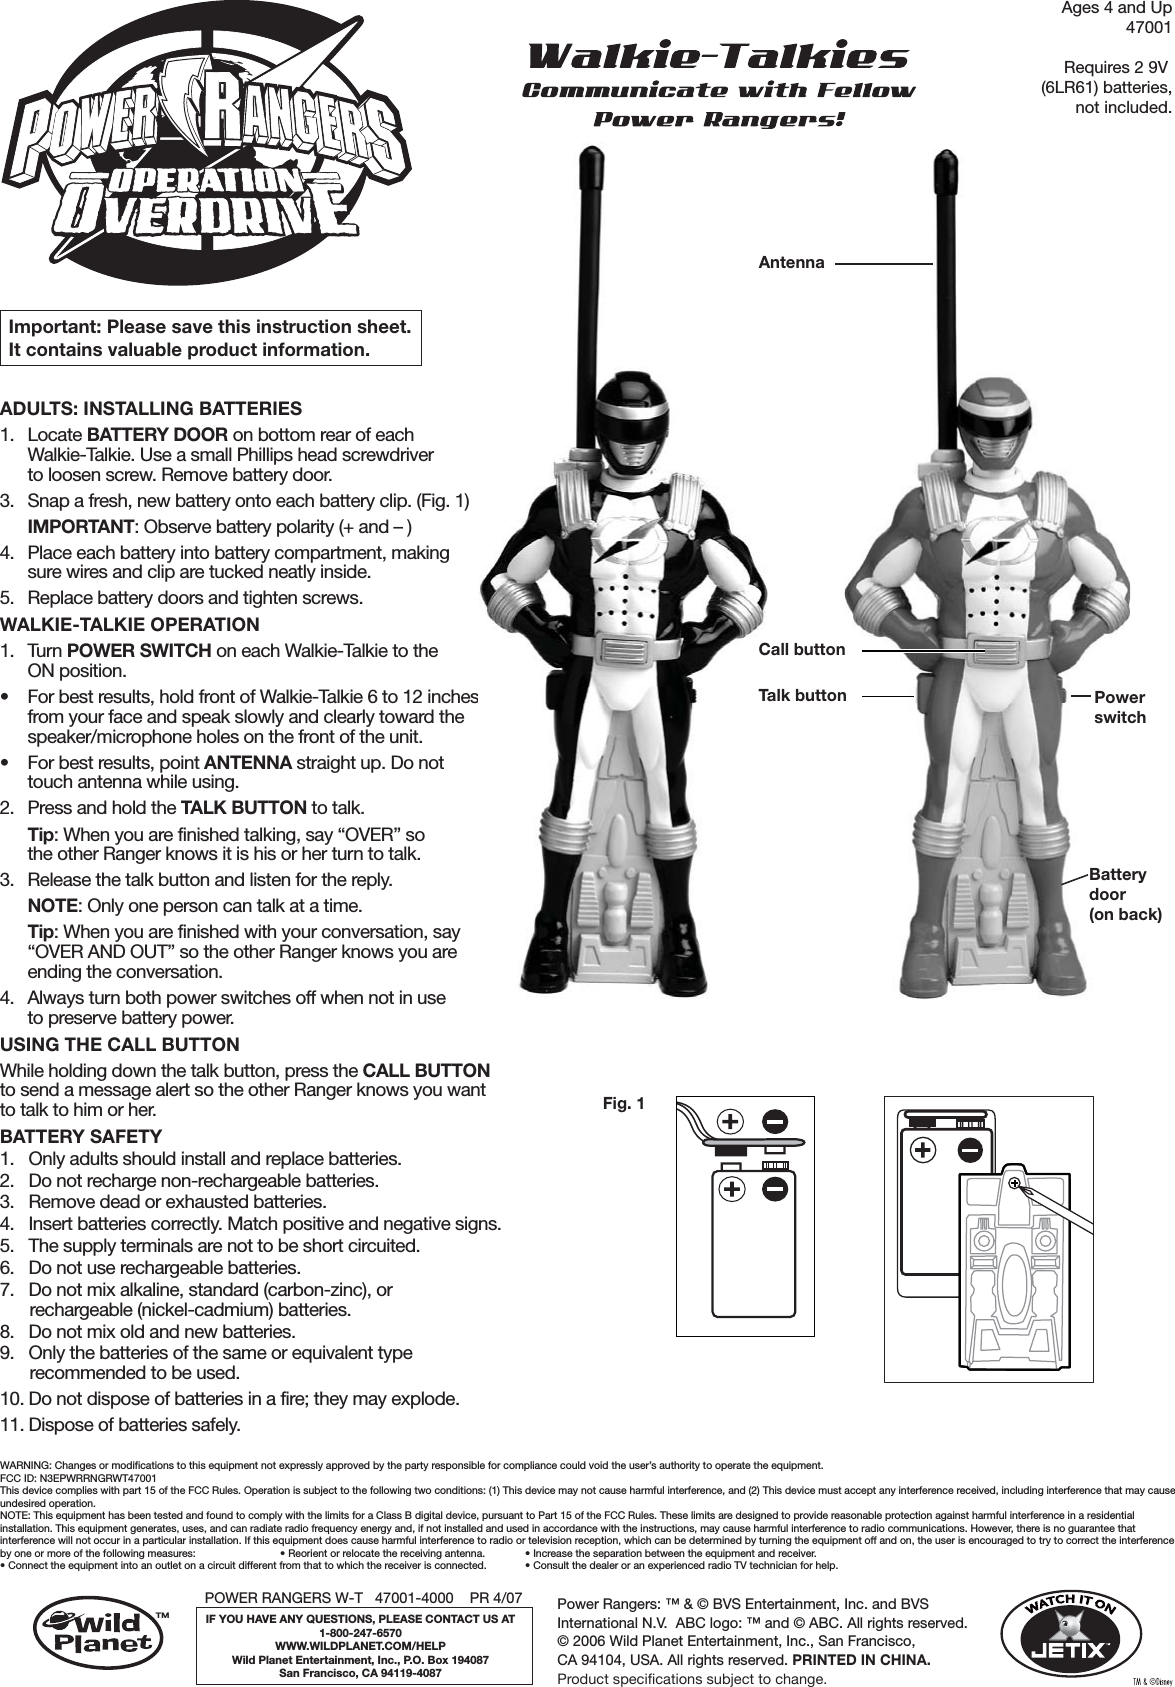 ADULTS: INSTALLING BATTERIES 1. Locate BATTERY DOOR on bottom rear of each Walkie-Talkie. Use a small Phillips head screwdriver to loosen screw. Remove battery door. 3.  Snap a fresh, new battery onto each battery clip. (Fig. 1) IMPORTANT: Observe battery polarity (+ and – )4.  Place each battery into battery compartment, making sure wires and clip are tucked neatly inside.5.  Replace battery doors and tighten screws.WALKIE-TALKIE OPERATION1. Turn POWER SWITCH on each Walkie-Talkie to the ON position.•  For best results, hold front of Walkie-Talkie 6 to 12 inches from your face and speak slowly and clearly toward the speaker/microphone holes on the front of the unit.•  For best results, point ANTENNA straight up. Do not touch antenna while using.2.  Press and hold the TALK BUTTON to talk. Tip: When you are finished talking, say “OVER” so the other Ranger knows it is his or her turn to talk. 3.  Release the talk button and listen for the reply. NOTE: Only one person can talk at a time. Tip: When you are finished with your conversation, say “OVER AND OUT” so the other Ranger knows you are ending the conversation.4.  Always turn both power switches off when not in use to preserve battery power.USING THE CALL BUTTONWhile holding down the talk button, press the CALL BUTTON to send a message alert so the other Ranger knows you want to talk to him or her.BATTERY SAFETY1.  Only adults should install and replace batteries. 2.  Do not recharge non-rechargeable batteries. 3.  Remove dead or exhausted batteries.4.  Insert batteries correctly. Match positive and negative signs.5.  The supply terminals are not to be short circuited. 6.  Do not use rechargeable batteries.  7.  Do not mix alkaline, standard (carbon-zinc), or rechargeable (nickel-cadmium) batteries. 8.  Do not mix old and new batteries. 9.  Only the batteries of the same or equivalent type recommended to be used. 10. Do not dispose of batteries in a fire; they may explode. 11. Dispose of batteries safely.Ages 4 and Up47001Requires 2 9V (6LR61) batteries,not included.Important: Please save this instruction sheet. It contains valuable product information.WARNING: Changes or modifications to this equipment not expressly approved by the party responsible for compliance could void the user’s authority to operate the equipment.FCC ID: N3EPWRRNGRWT47001This device complies with part 15 of the FCC Rules. Operation is subject to the following two conditions: (1) This device may not cause harmful interference, and (2) This device must accept any interference received, including interference that may cause undesired operation.NOTE: This equipment has been tested and found to comply with the limits for a Class B digital device, pursuant to Part 15 of the FCC Rules. These limits are designed to provide reasonable protection against harmful interference in a residential installation. This equipment generates, uses, and can radiate radio frequency energy and, if not installed and used in accordance with the instructions, may cause harmful interference to radio communications. However, there is no guarantee that interference will not occur in a particular installation. If this equipment does cause harmful interference to radio or television reception, which can be determined by turning the equipment off and on, the user is encouraged to try to correct the interference by one or more of the following measures:                        • Reorient or relocate the receiving antenna.    • Increase the separation between the equipment and receiver.  • Connect the equipment into an outlet on a circuit different from that to which the receiver is connected.  • Consult the dealer or an experienced radio TV technician for help.Fig. 1Fig. 5Talk buttonCall buttonPowerswitchBatterydoor(on back)AntennaPOWER RANGERS W-T   47001-4000    PR 4/07IF YOU HAVE ANY QUESTIONS, PLEASE CONTACT US AT1-800-247-6570WWW.WILDPLANET.COM/HELPWild Planet Entertainment, Inc., P.O. Box 194087San Francisco, CA 94119-4087TMPower Rangers: ™ &amp; © BVS Entertainment, Inc. and BVS International N.V.  ABC logo: ™ and © ABC. All rights reserved.© 2006 Wild Planet Entertainment, Inc., San Francisco, CA 94104, USA. All rights reserved. PRINTED IN CHINA.Product specifications subject to change. 